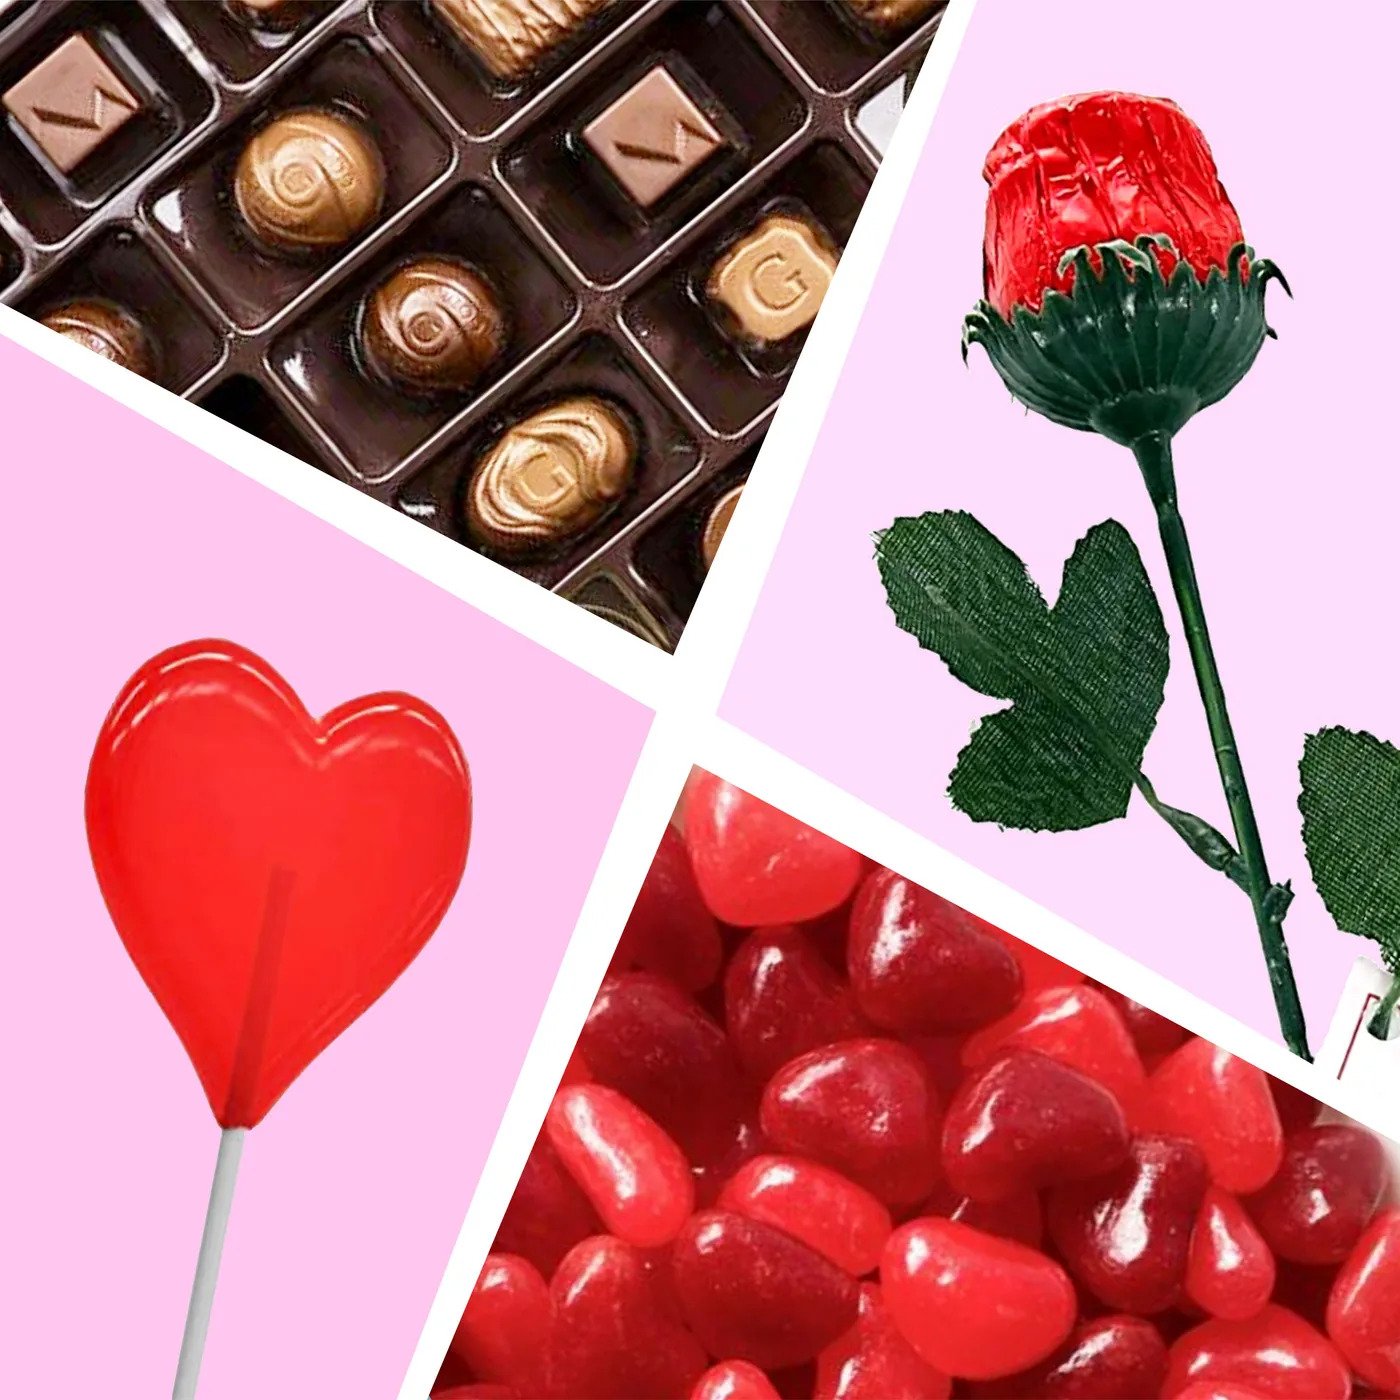 A photo illustration of a candy heart lollipop, chocolate rose, red jelly beans, and chocolates